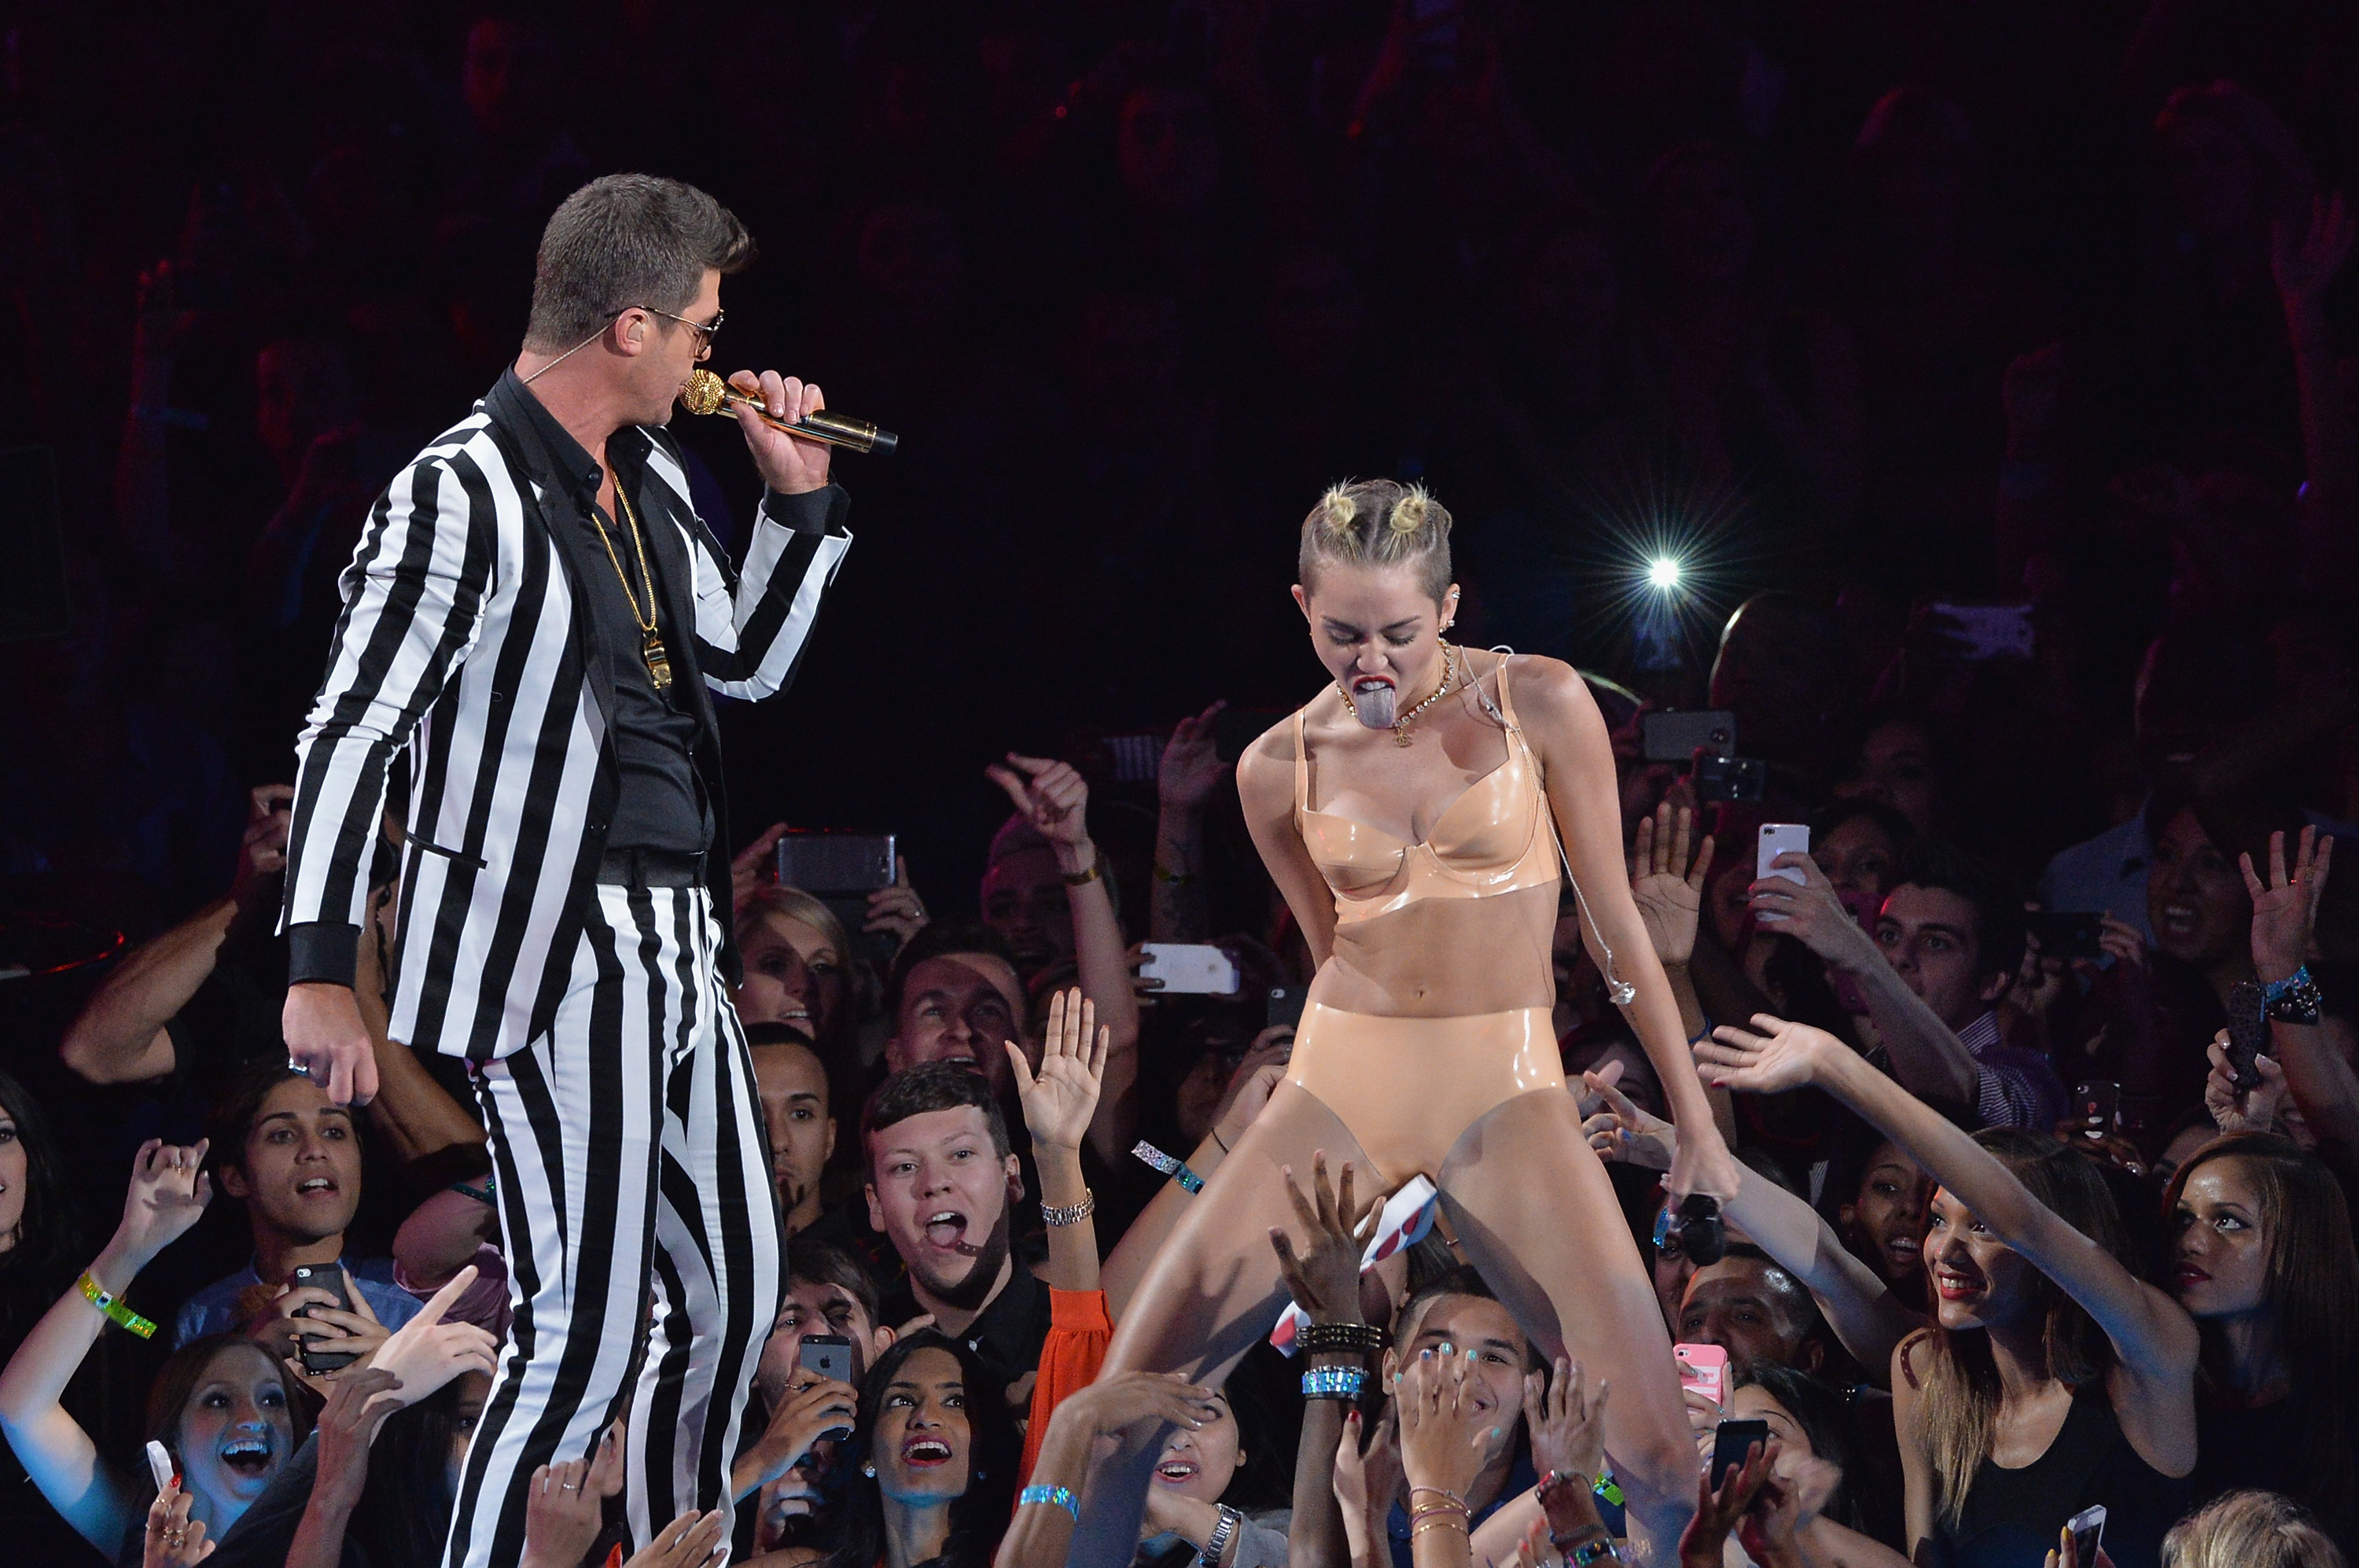 best of Allows her touch miley cyrus fans